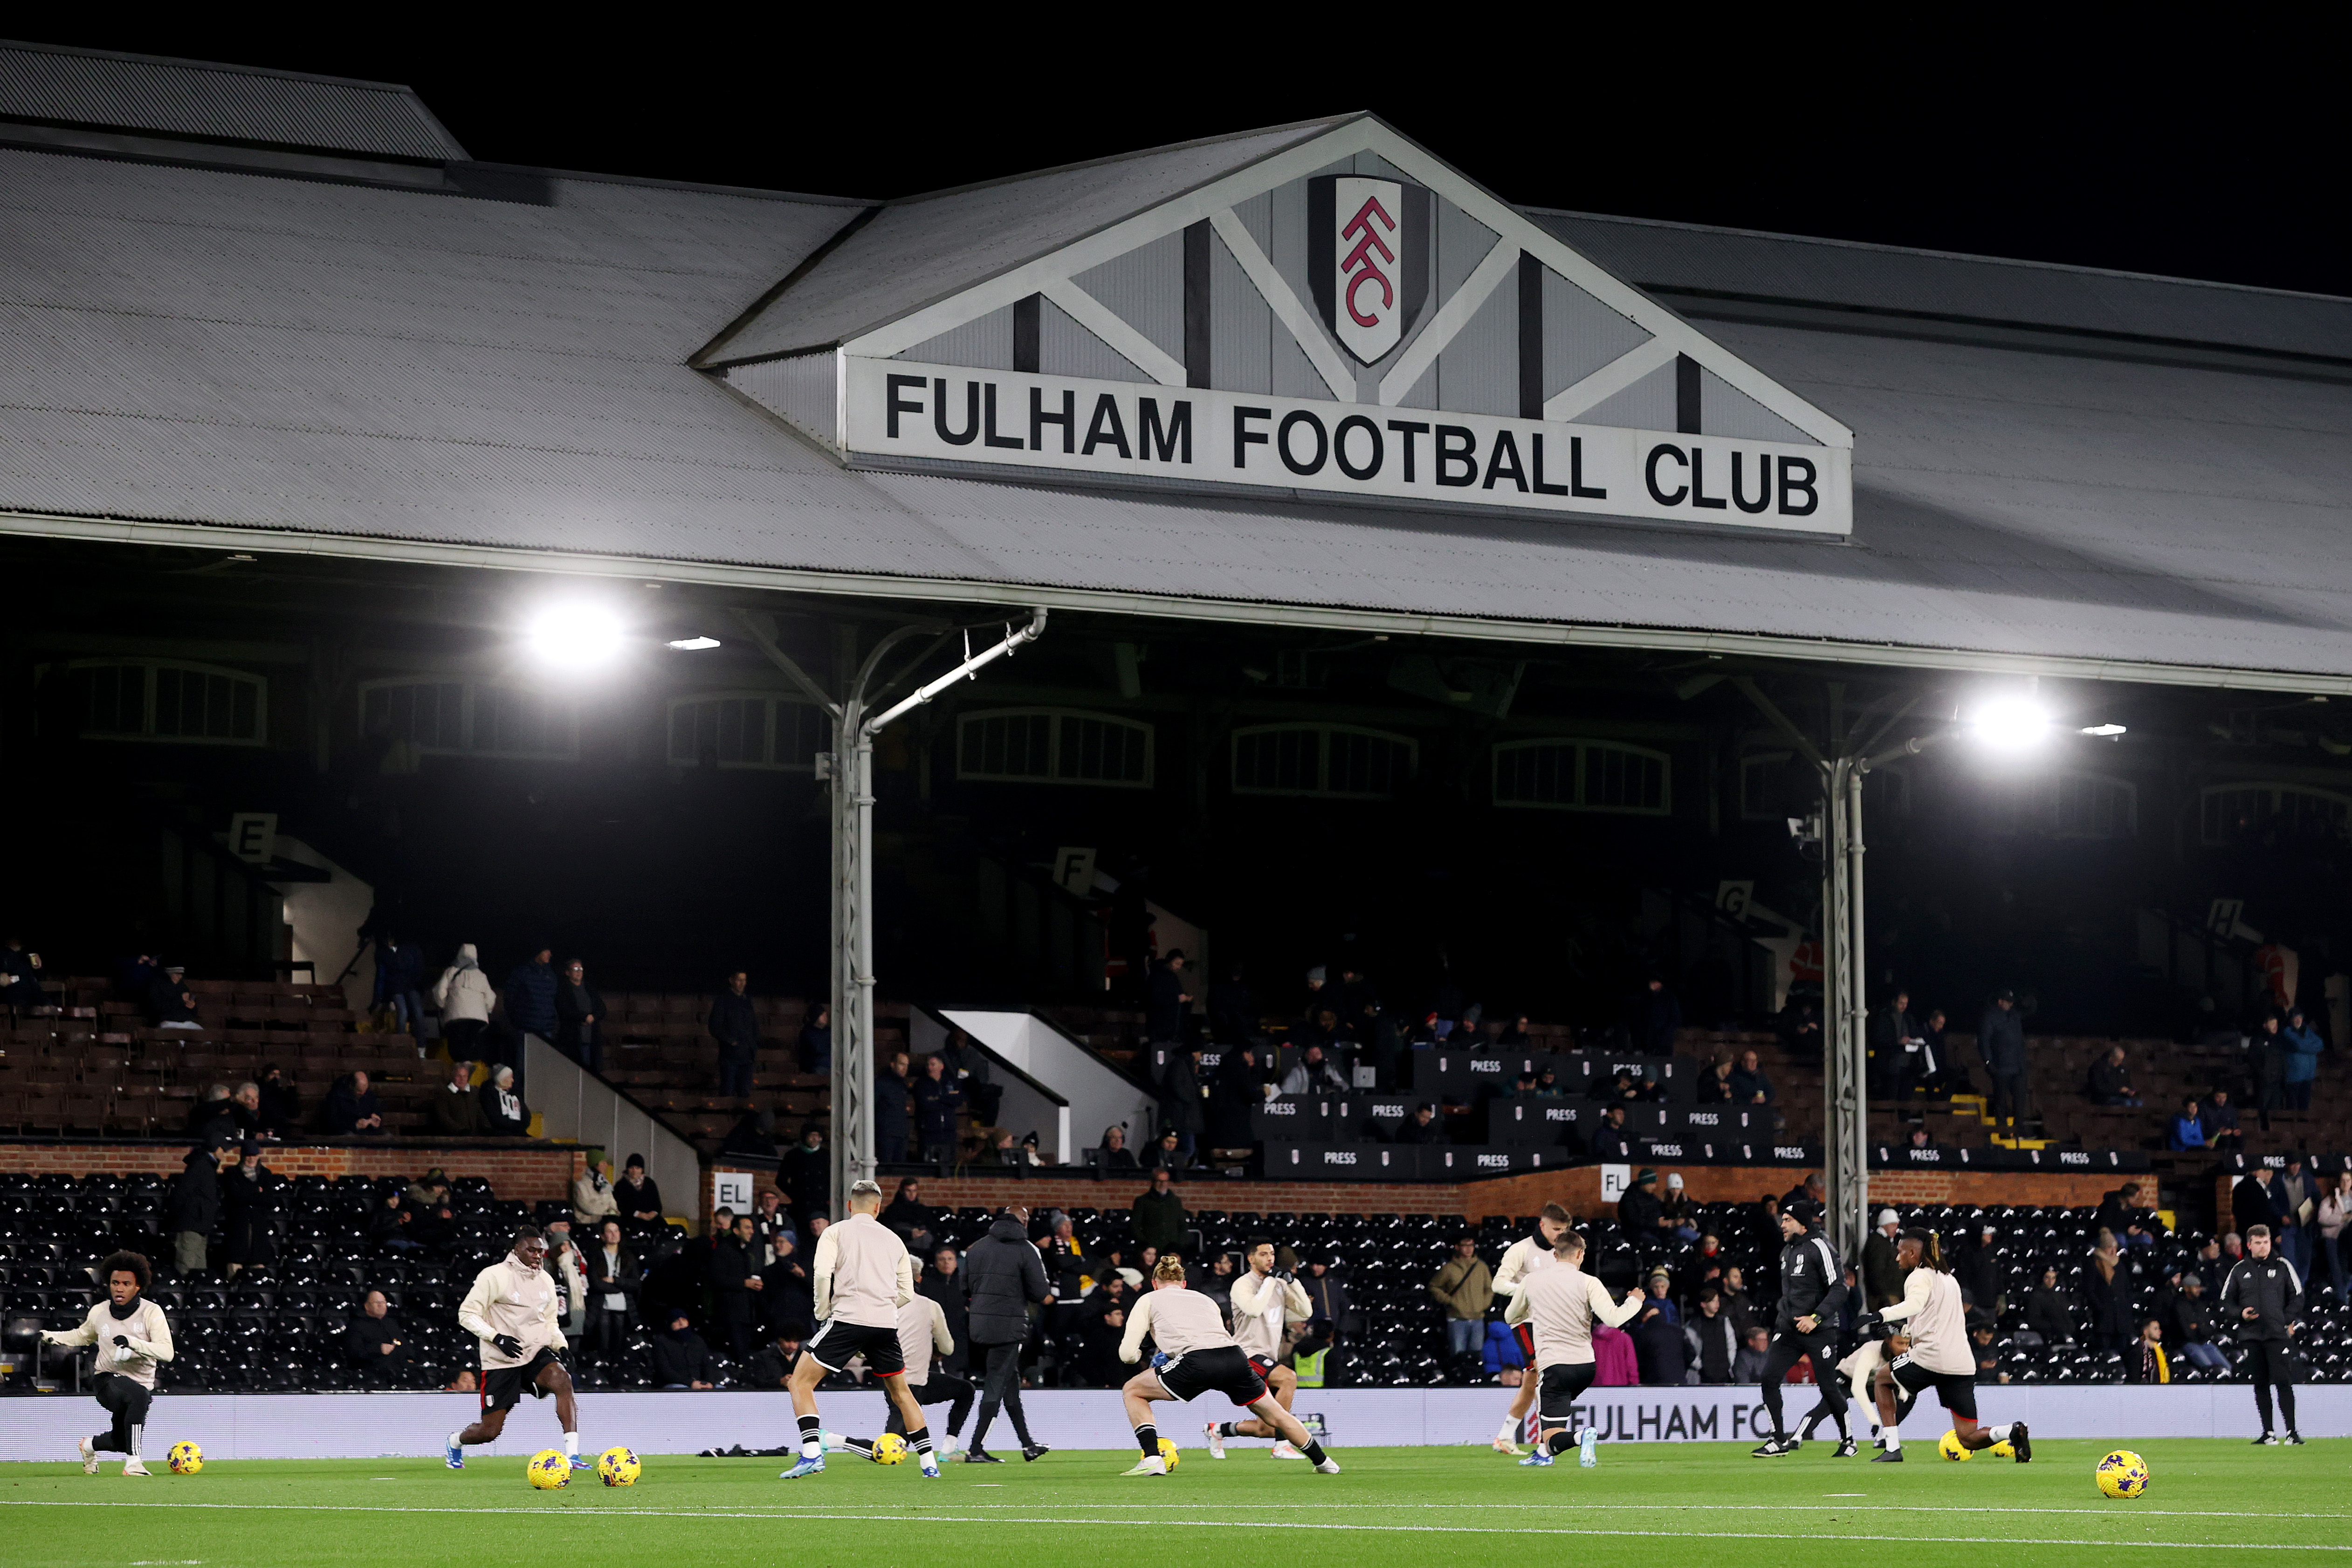 Craven Cottage is regarded as one of the most homely if compact grounds